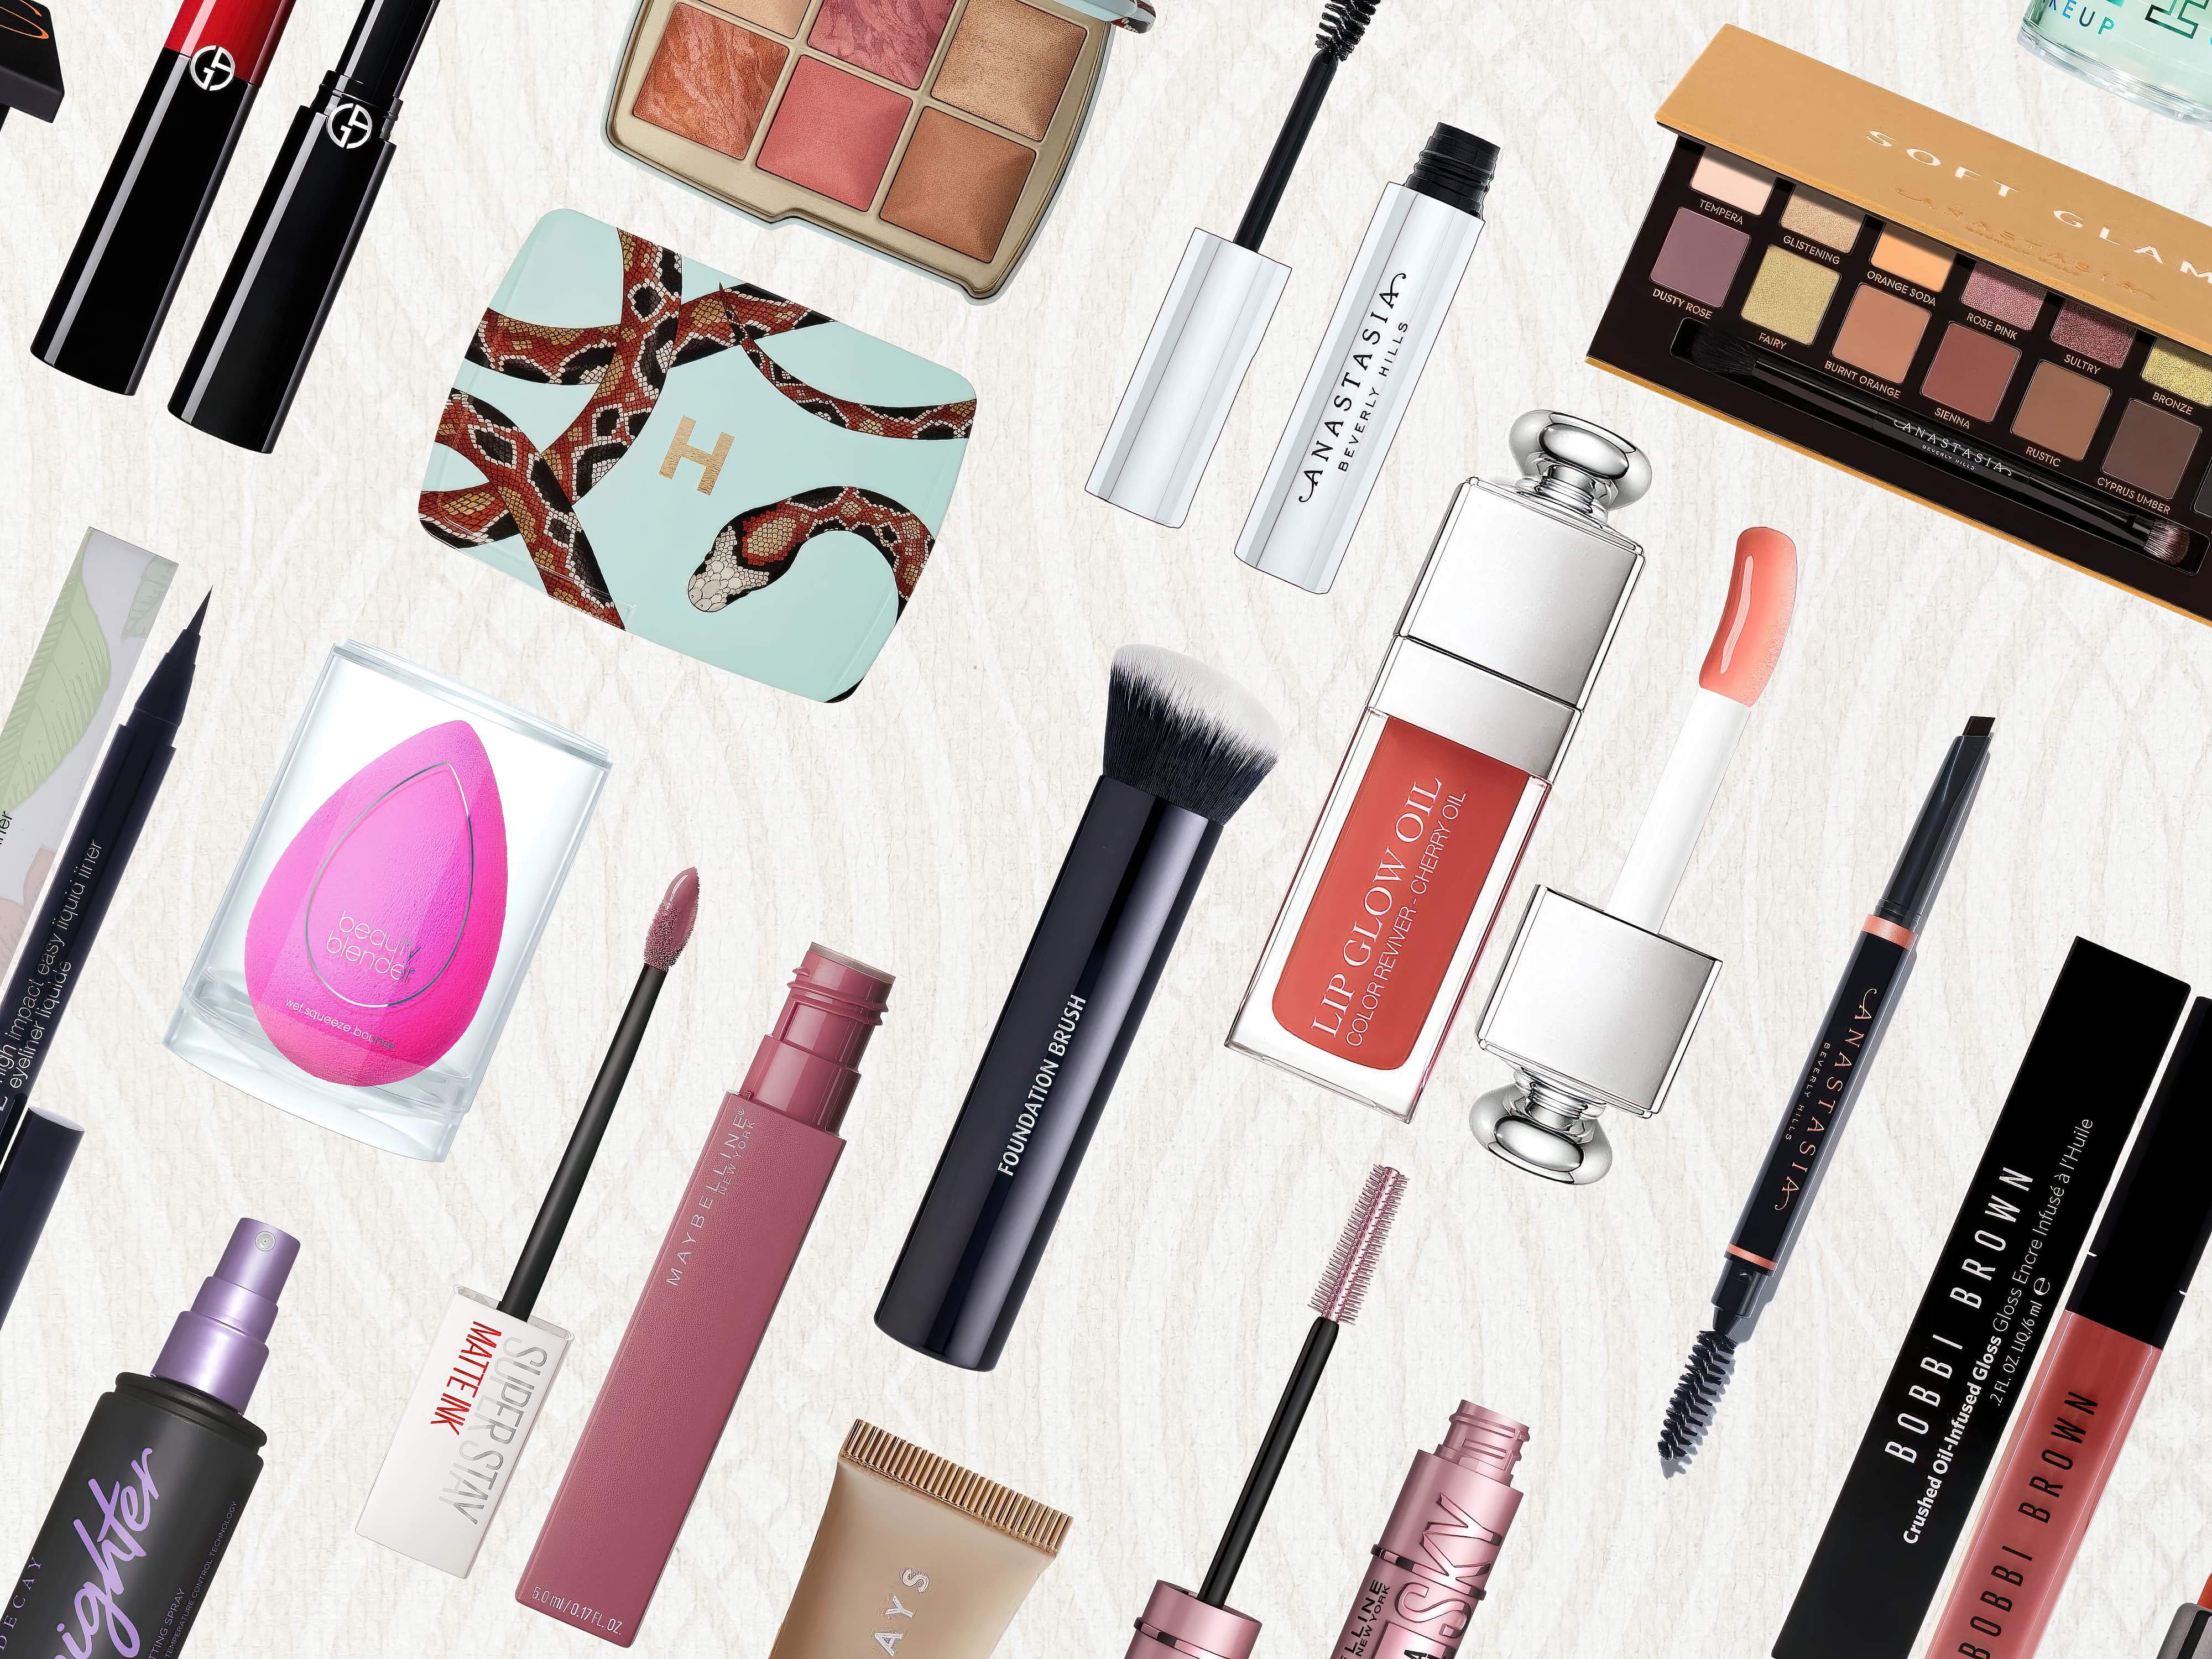 A group of the best makeup products, palettes, brushes and powders on a light cream background